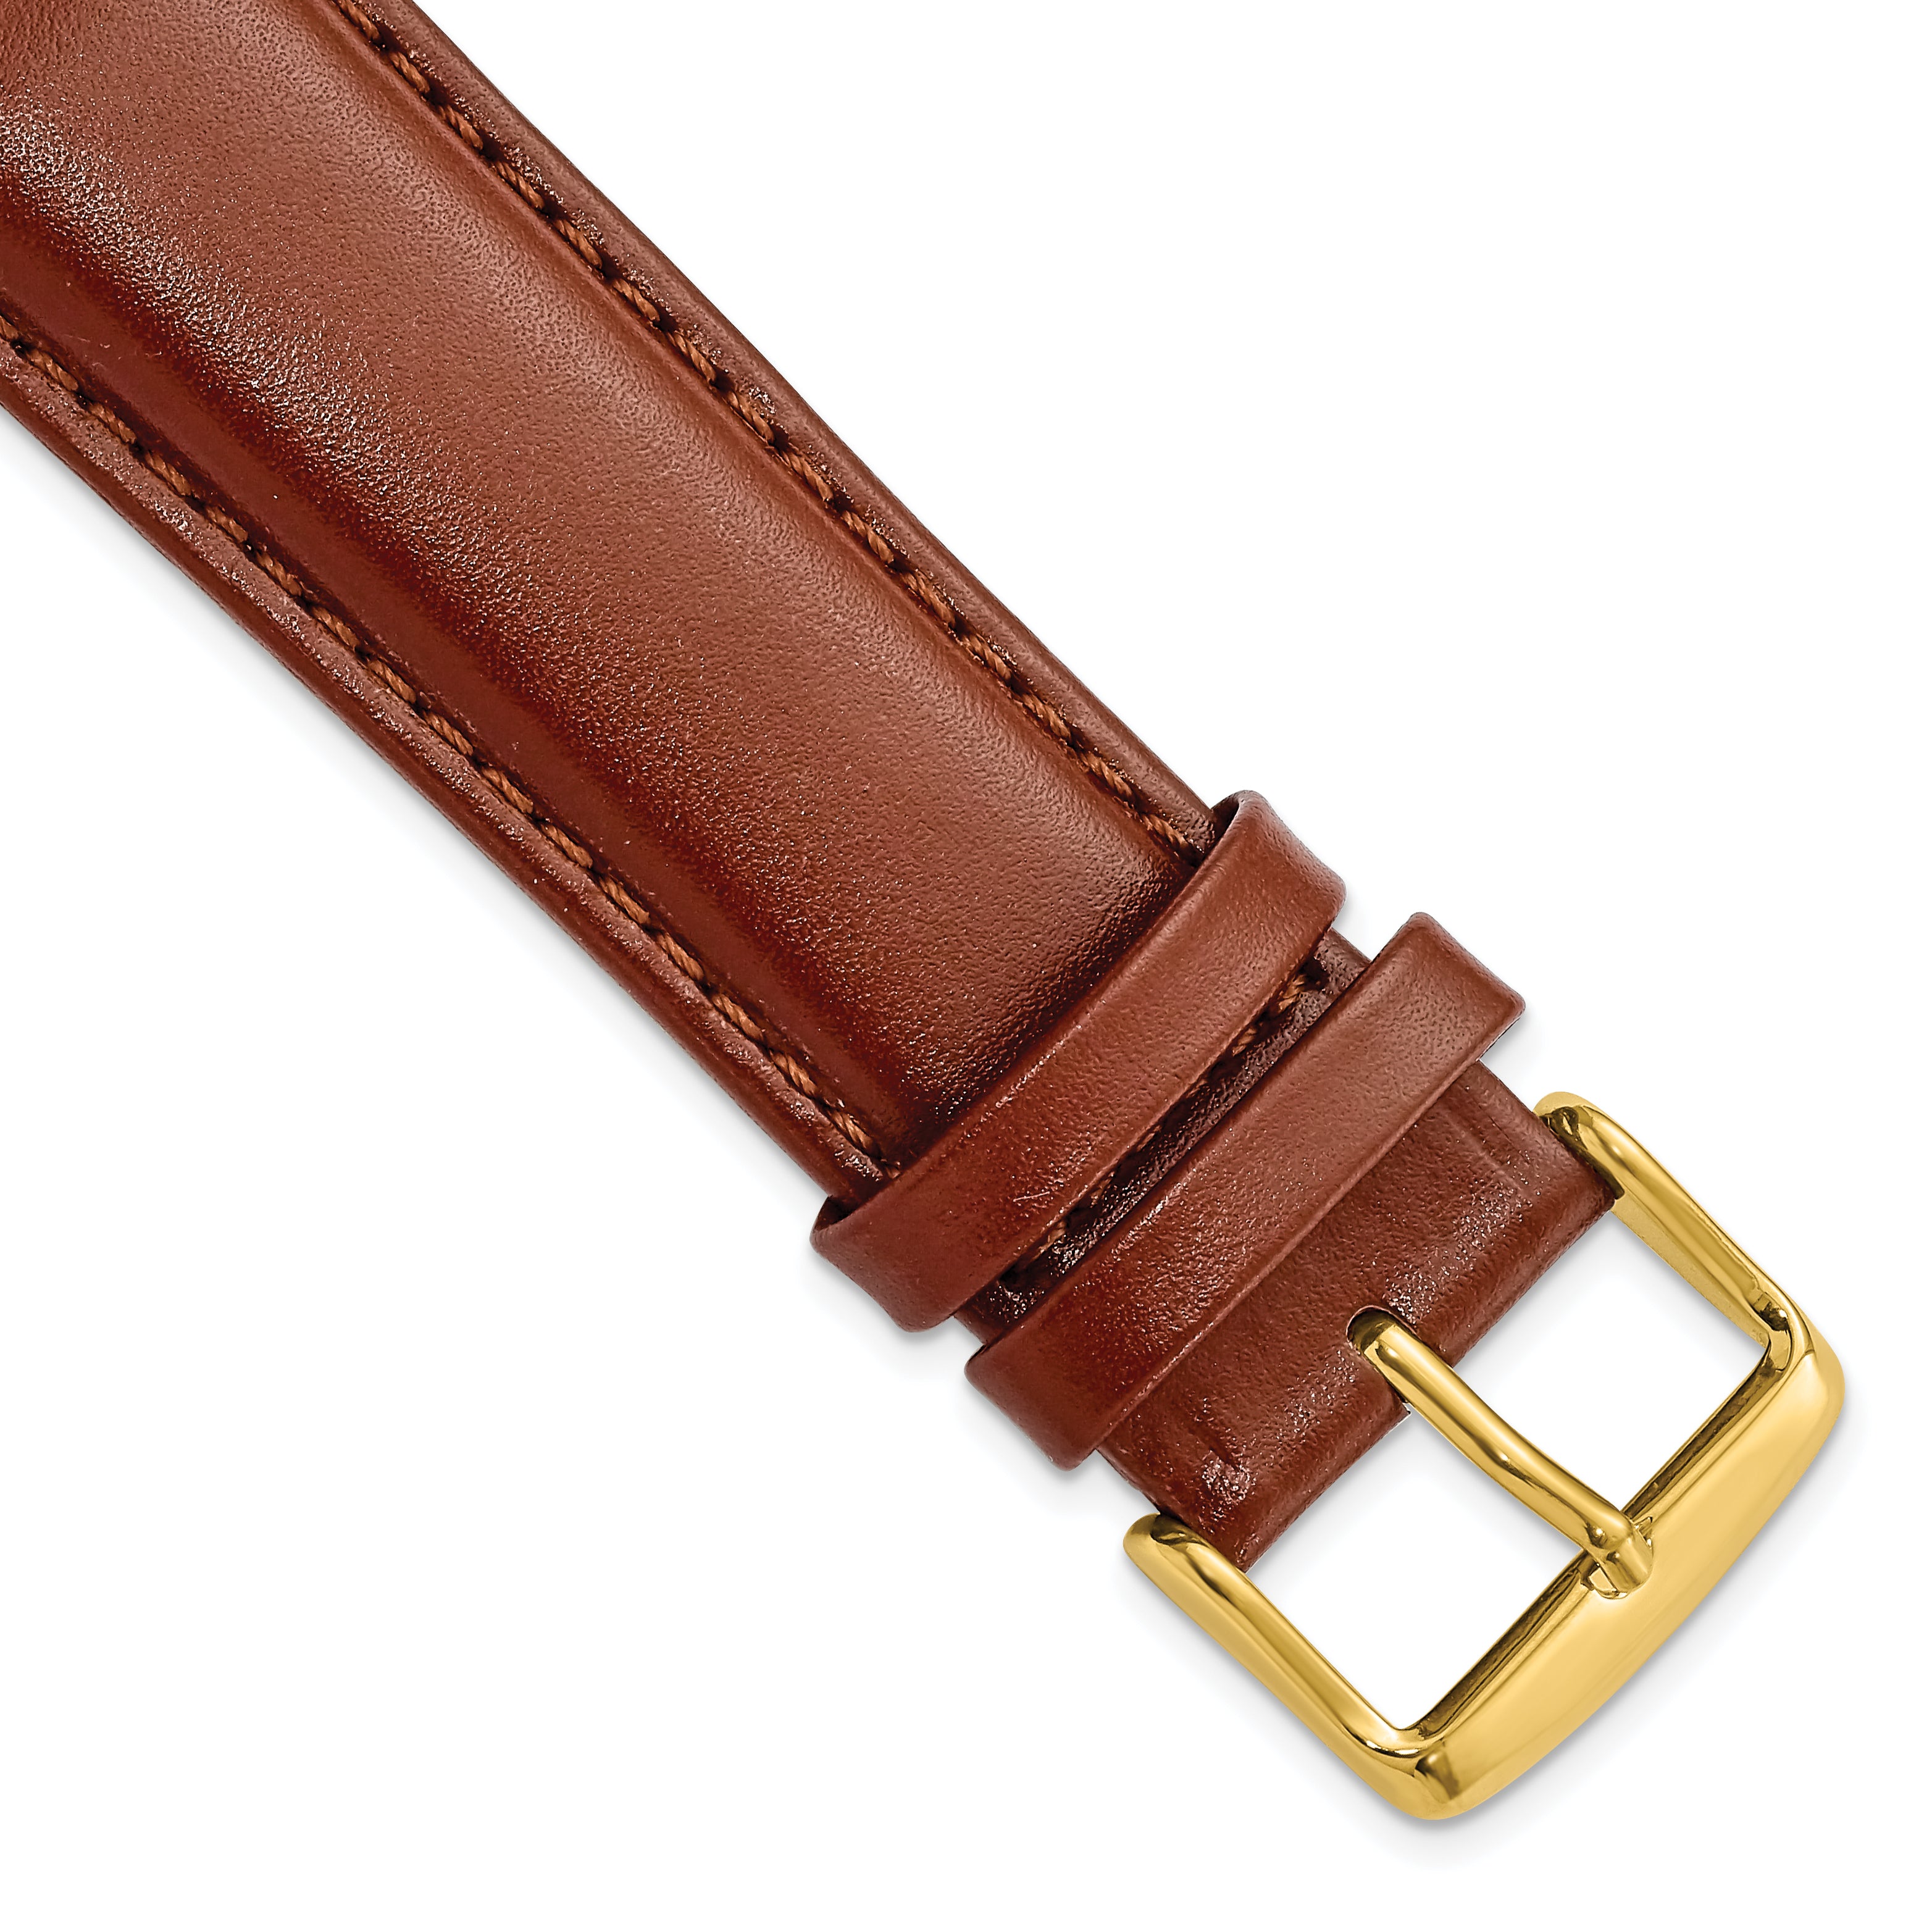 DeBeer 22mm Havana Smooth Leather Chronograph with Gold-tone Buckle 7.5 inch Watch Band